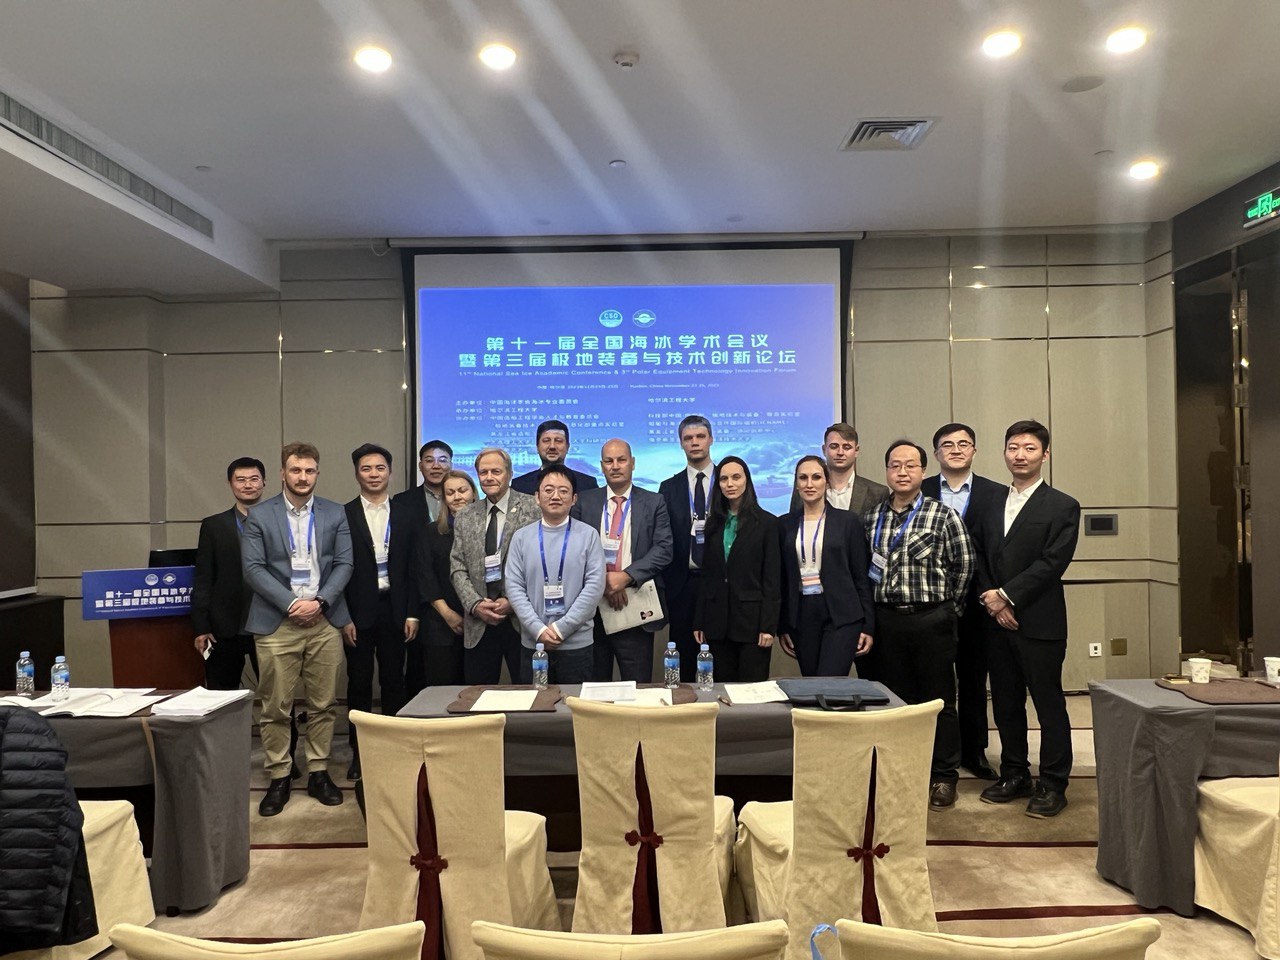 RS speaks at the National Sea Ice Academic Conference in Harbin